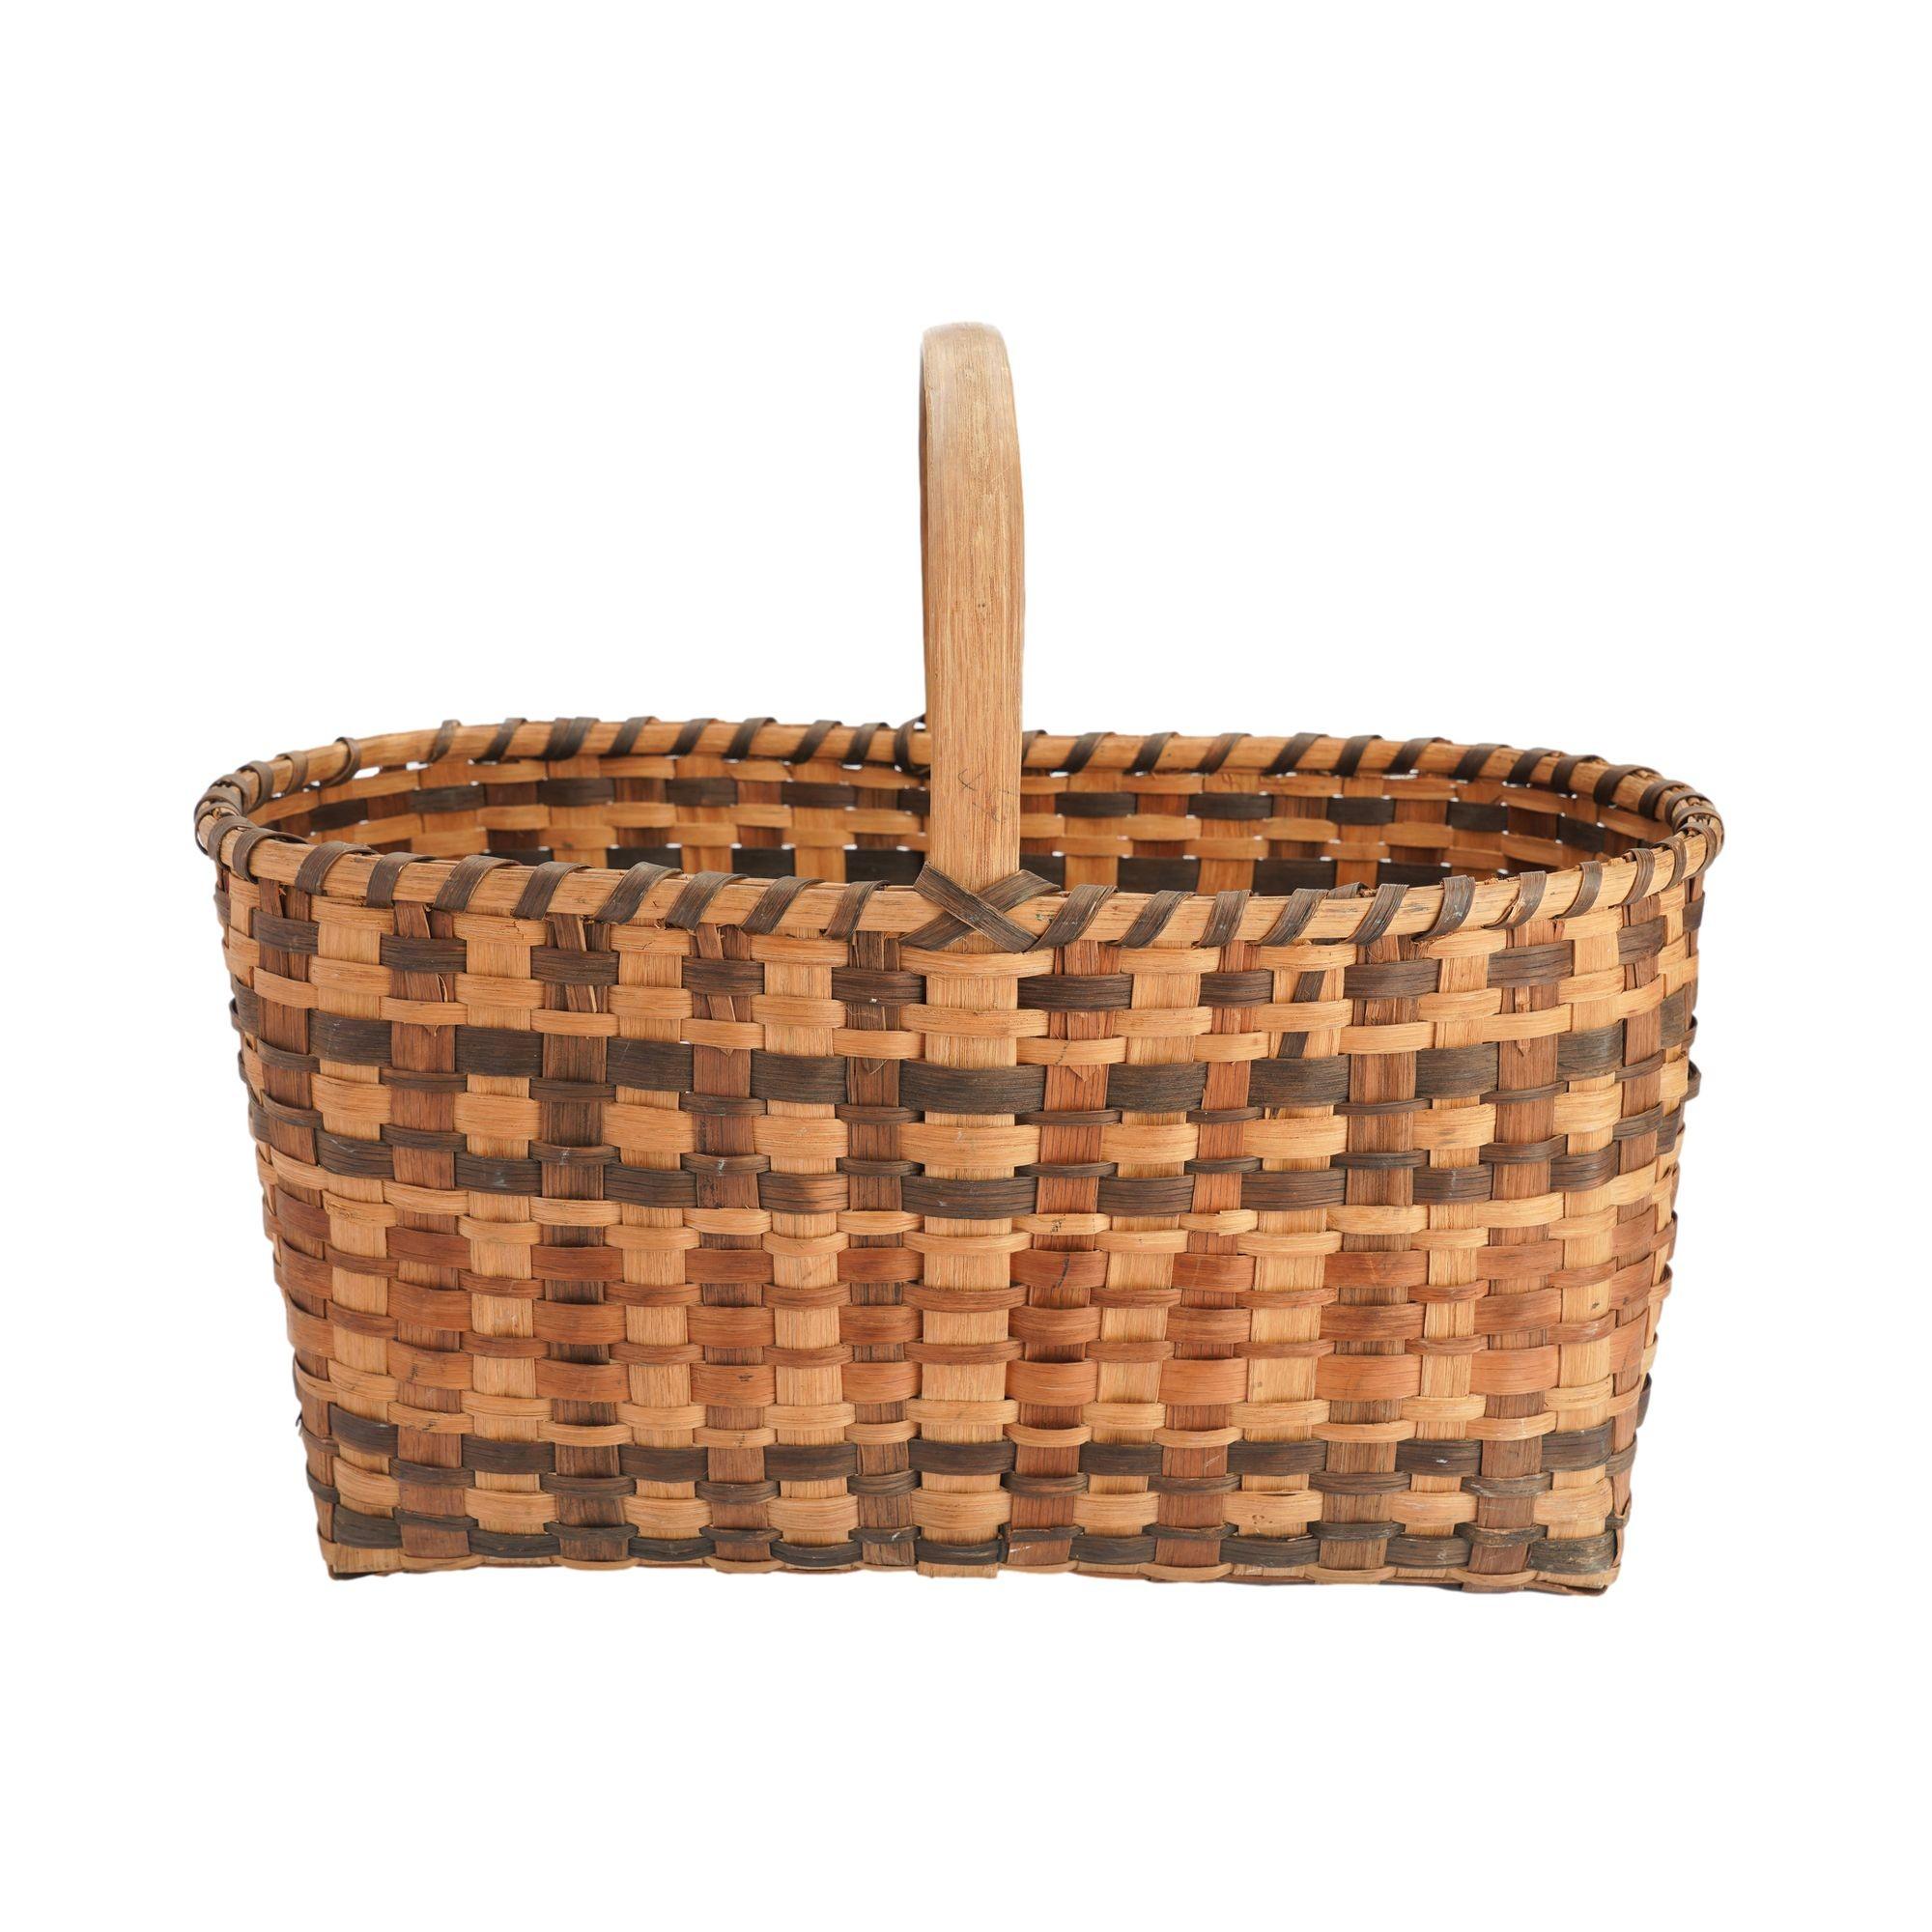 Vintage Oklahoma Cherokee hand woven rectangular basket of split white oak with steam bent white oak handle. Pattern is created with walnut dyed oak splines alternating with un-dyed white oak splines.

Native American, early 20th